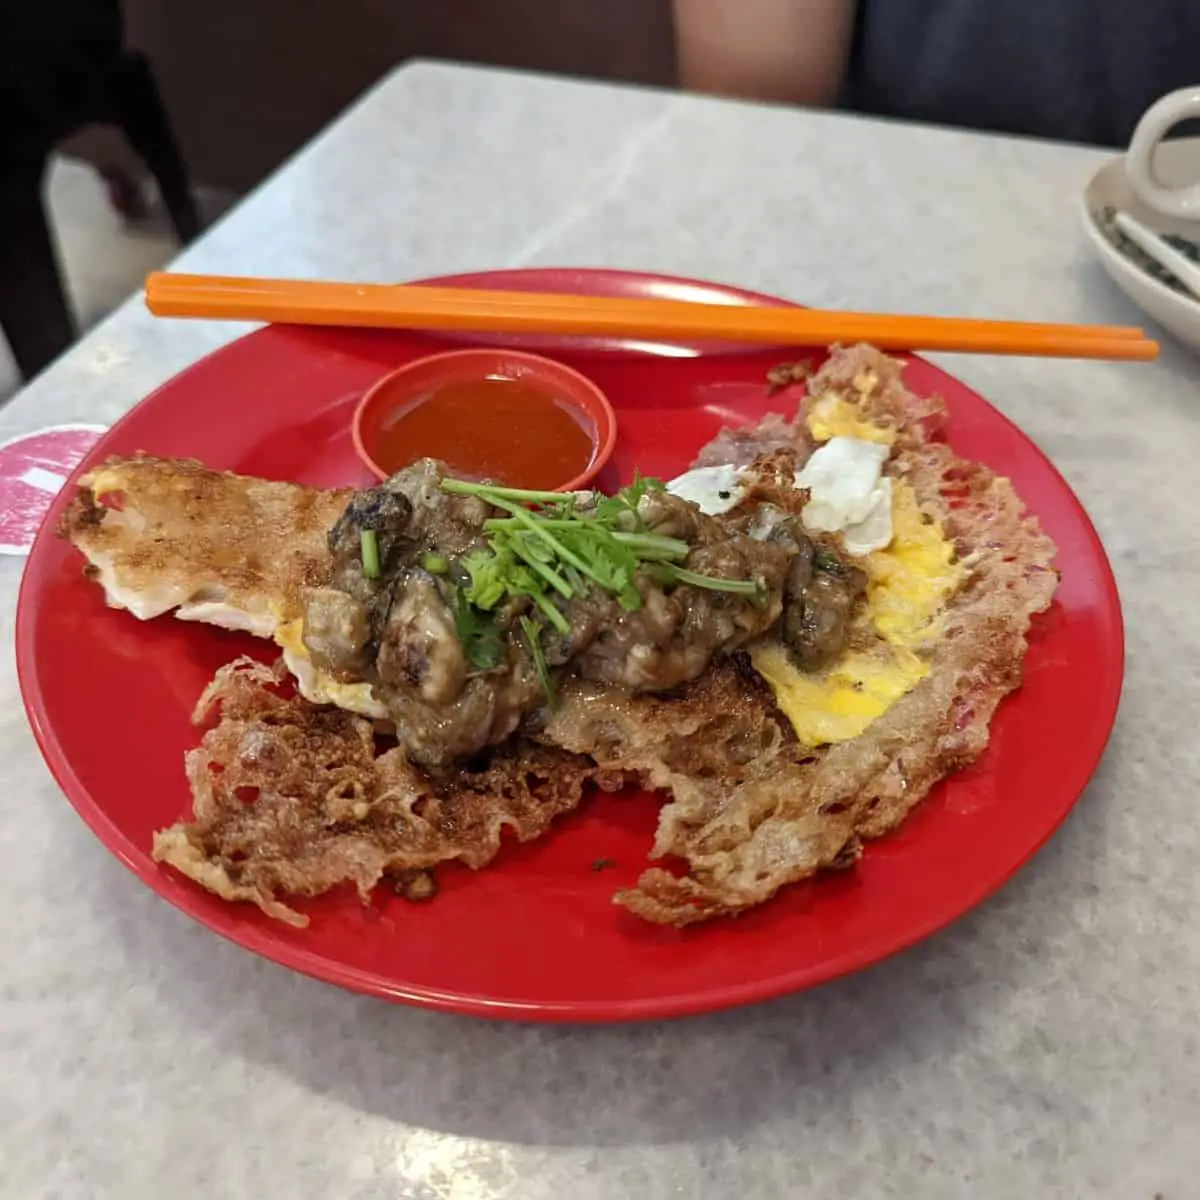 Oyster omelette at OO White Coffee Penang street food